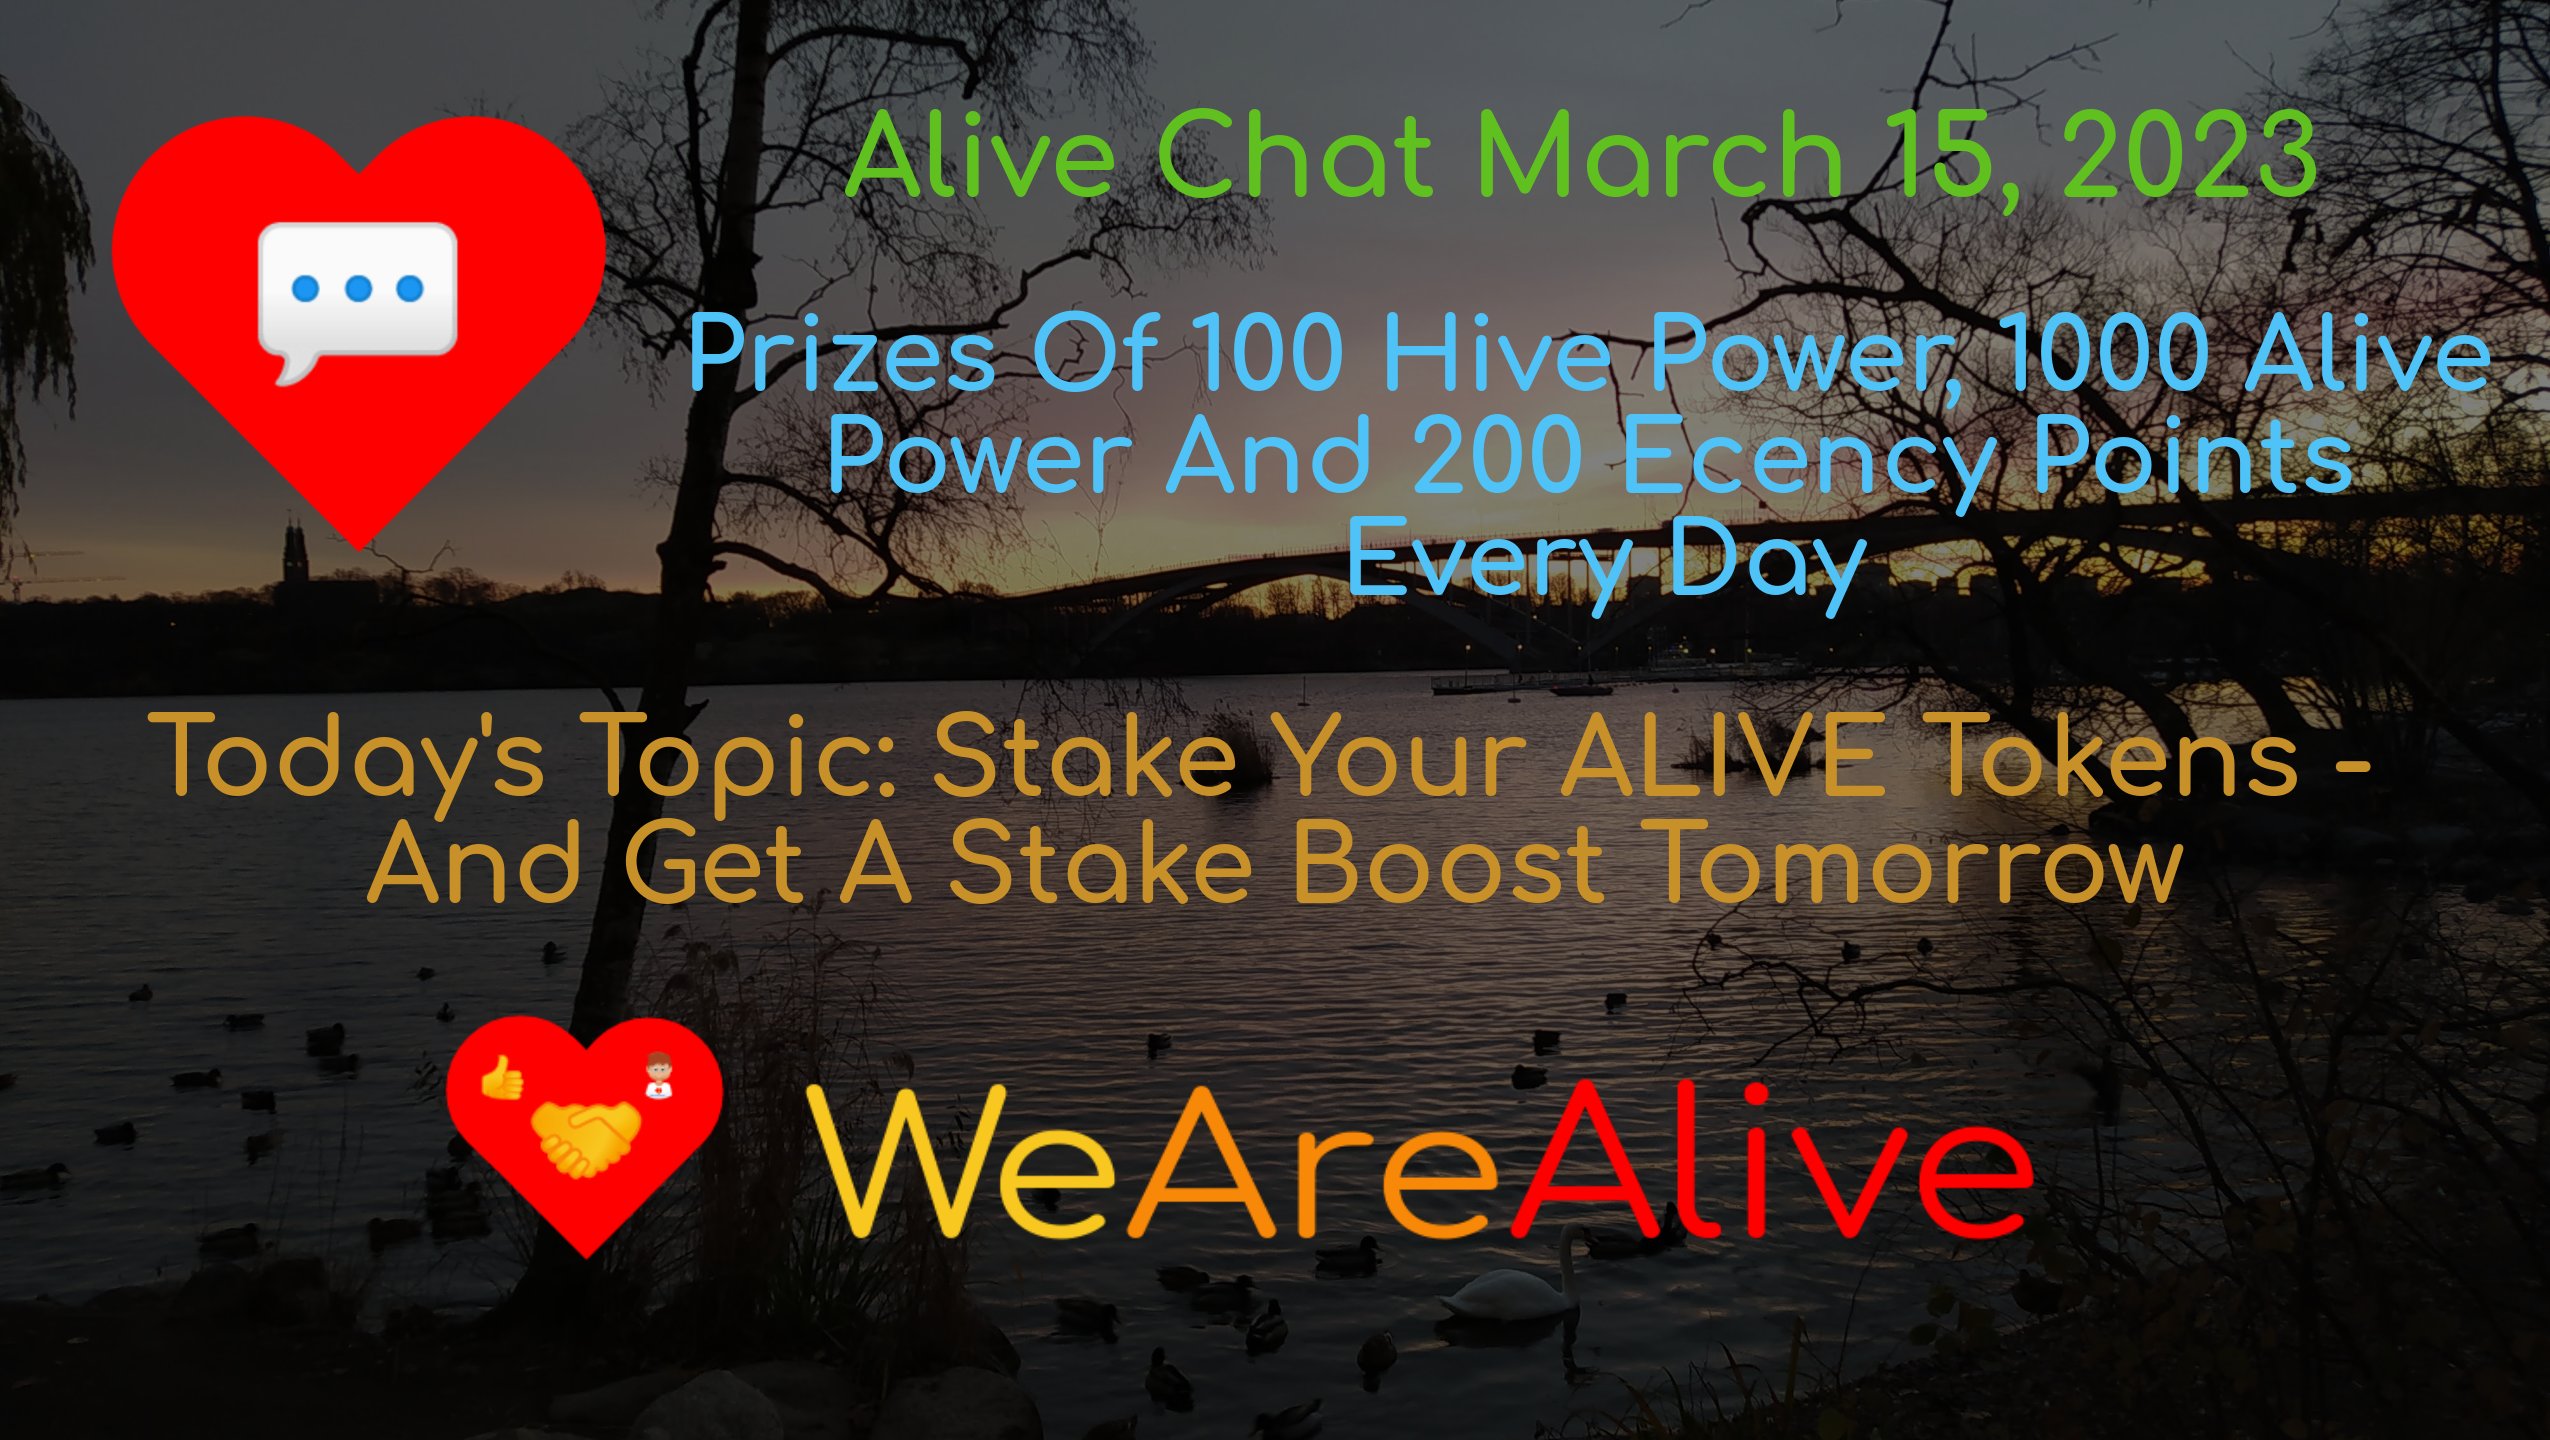 @alive.chat/alive-chat-march-15-2023